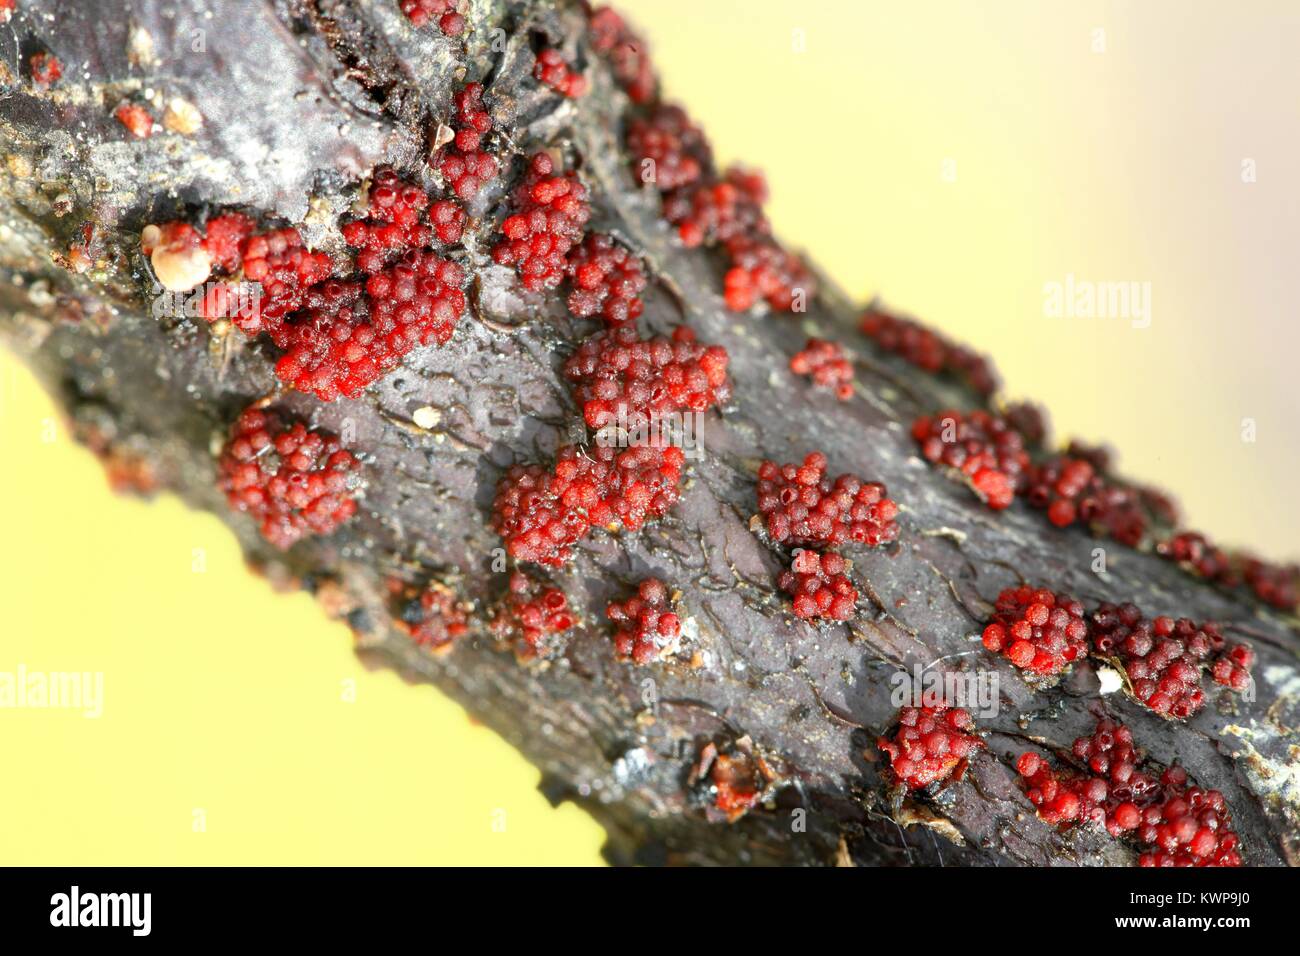 Coral spot, Nectria cinnabarina, growing on willow Stock Photo